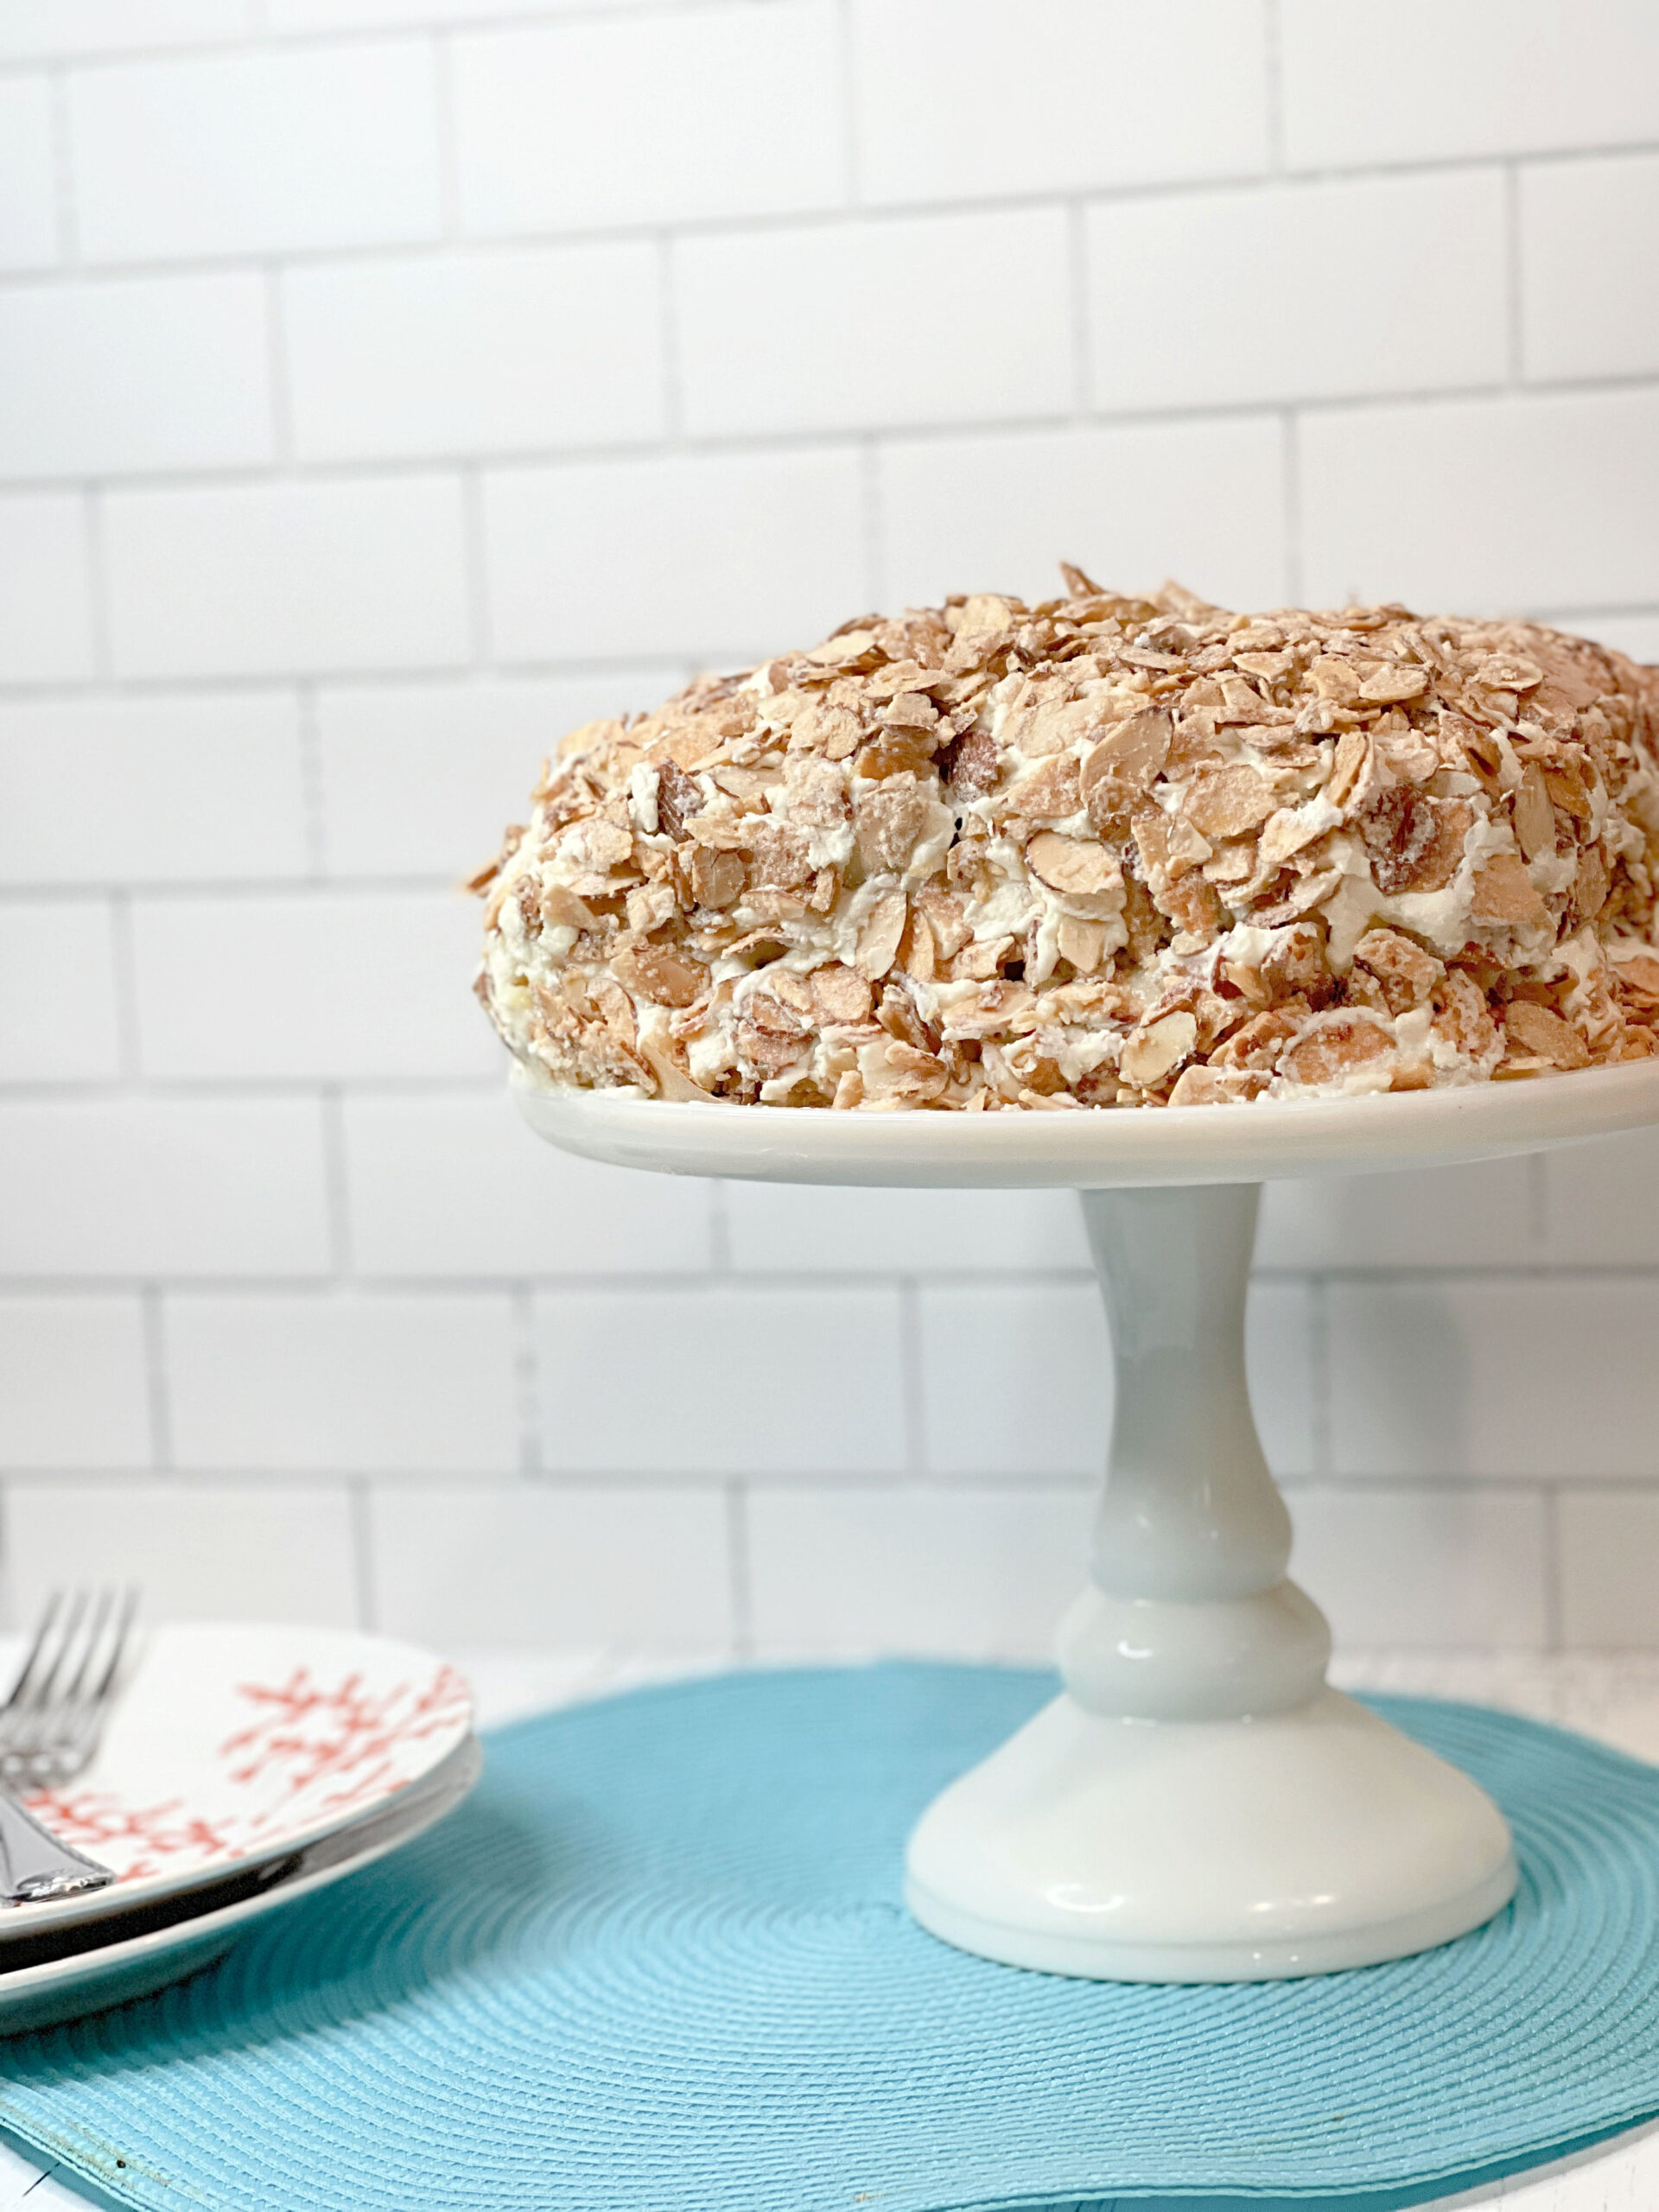 Side view of a Burnt Almond Torte cake on a white cake plate sitting on a blue placemat.